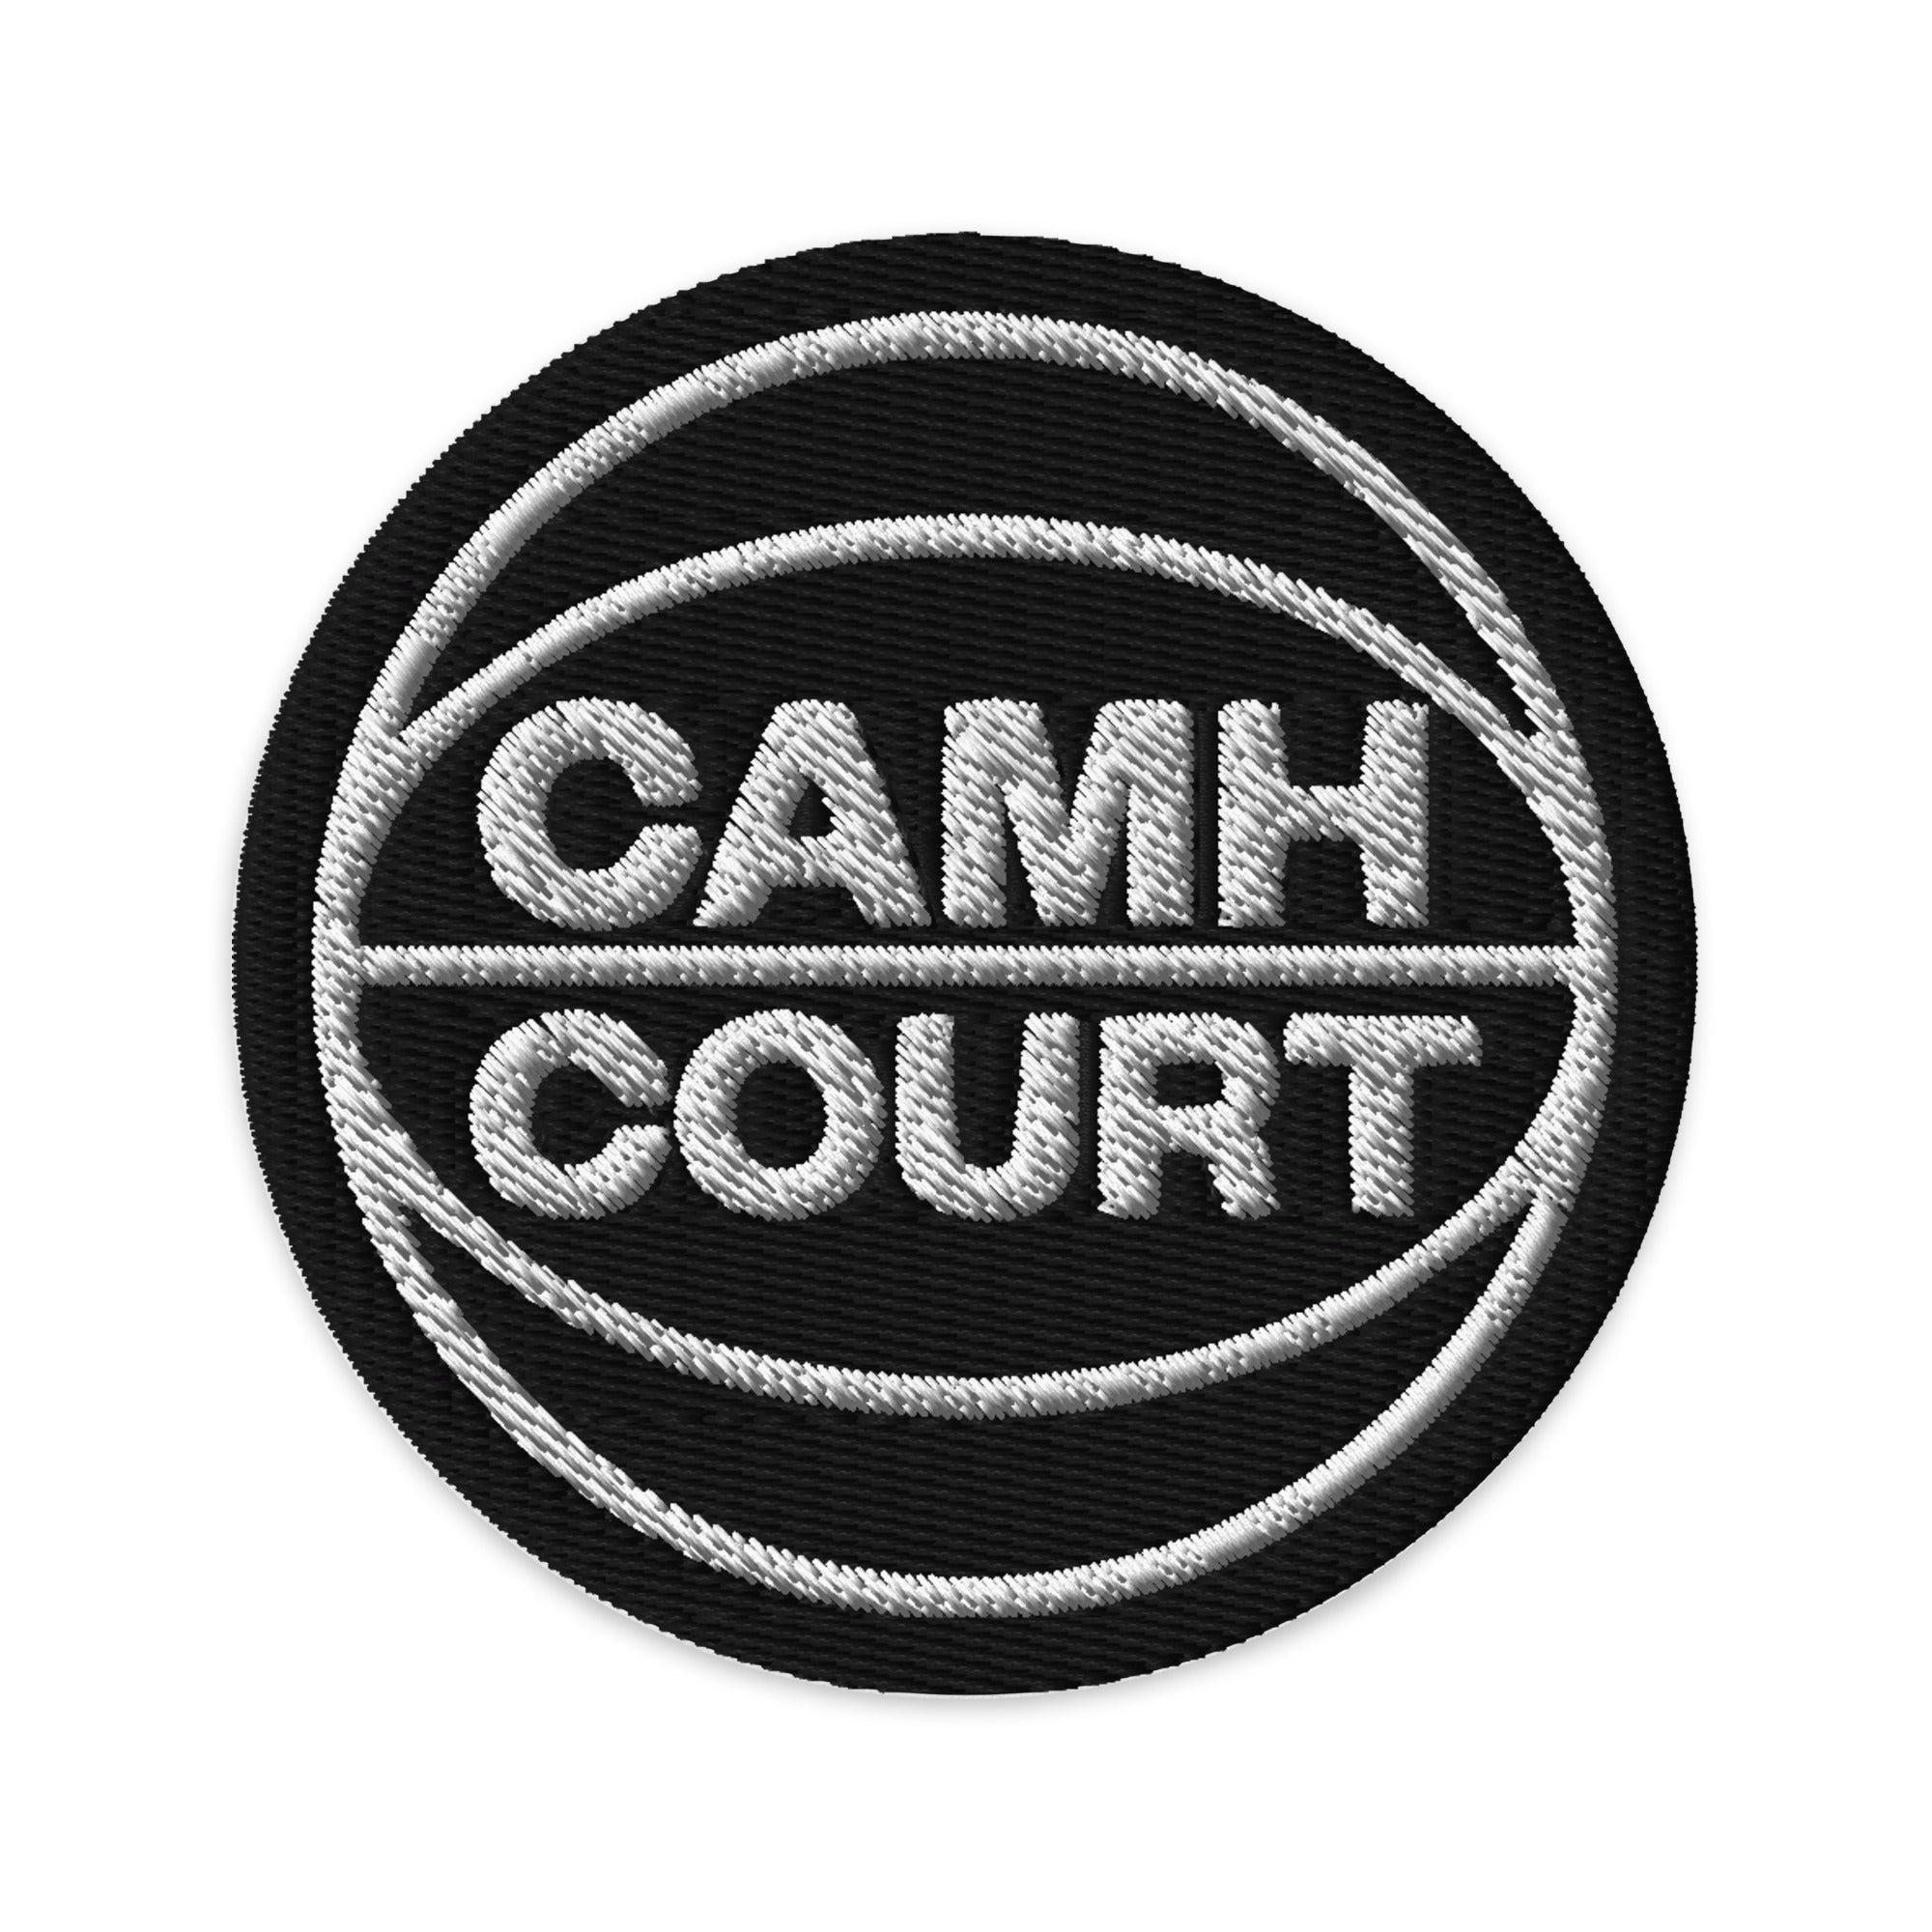 CAMH COURT Patch